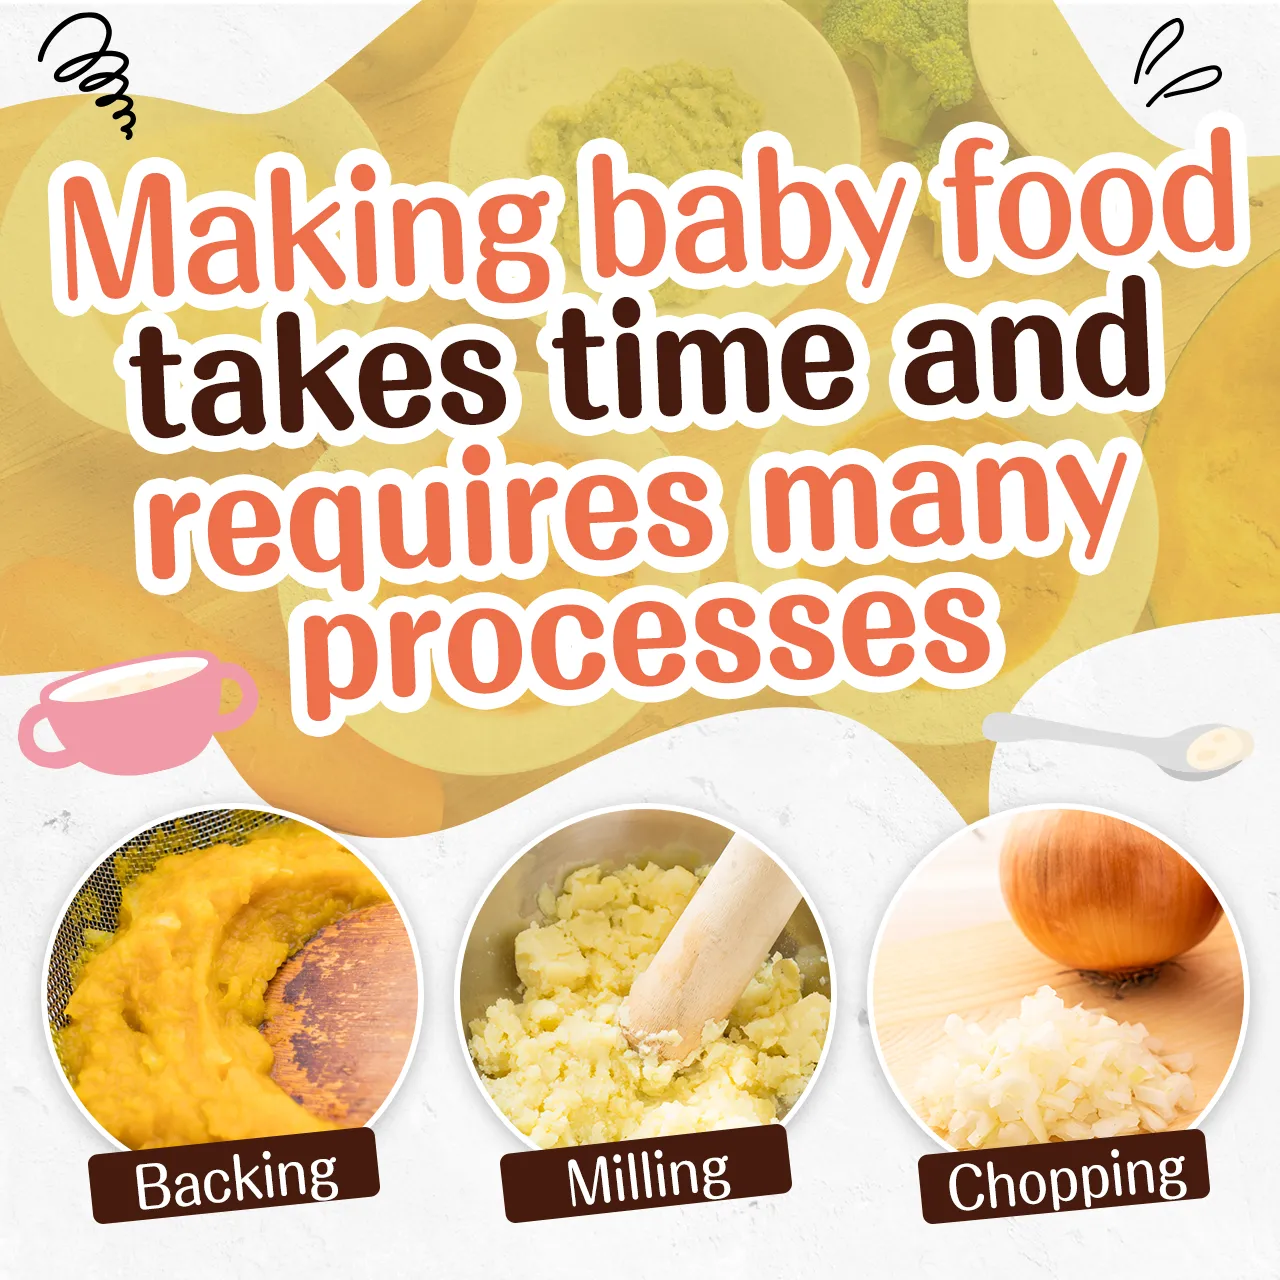 It is difficult to make baby food